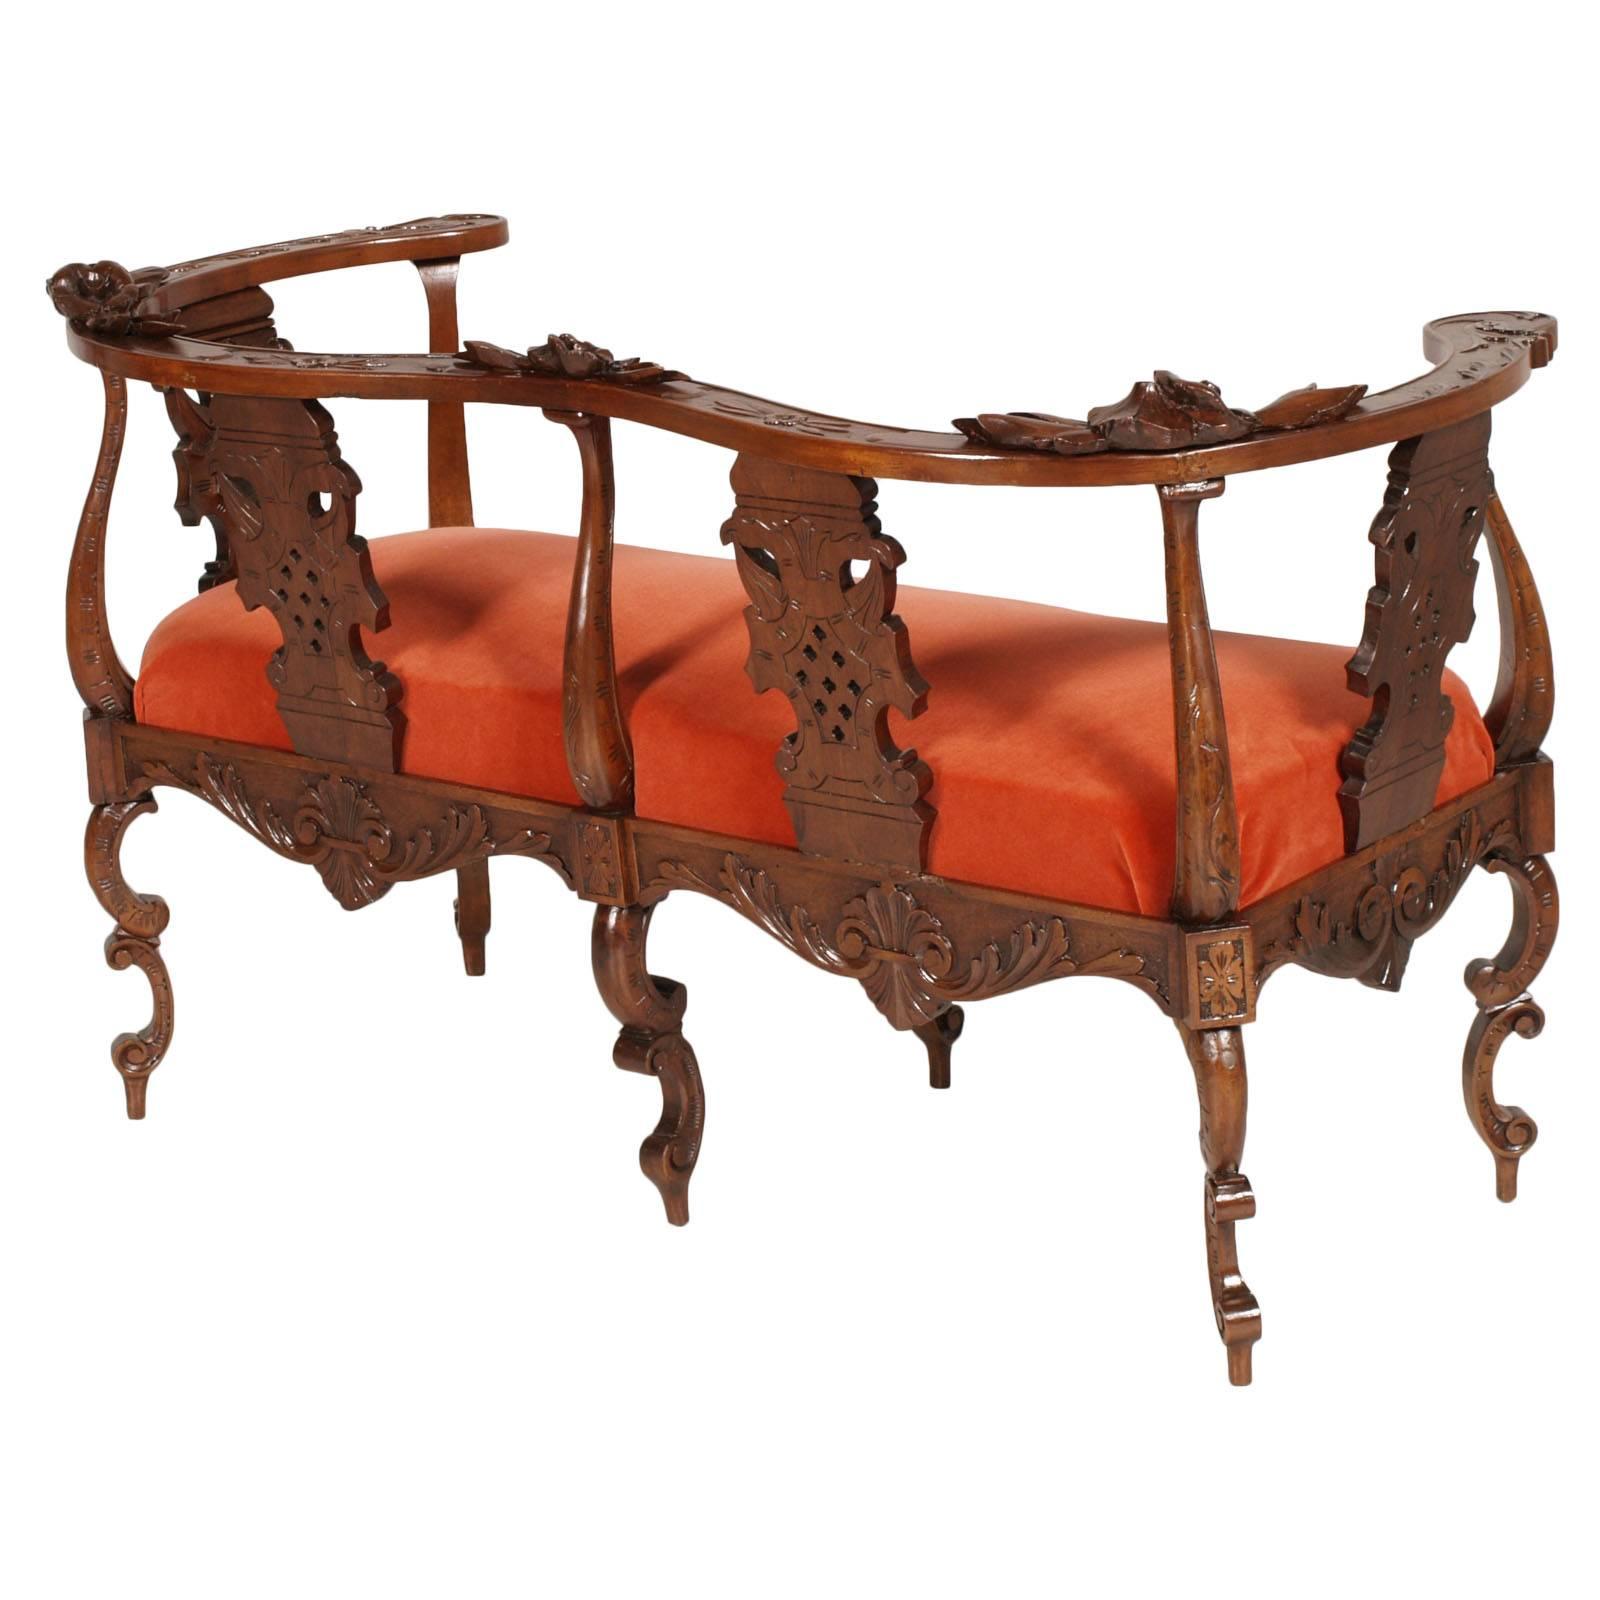 Renaissance Revival Spectacular Two-Seat Sofa by Testolini & Salviati Murano Venice Totally Carved For Sale